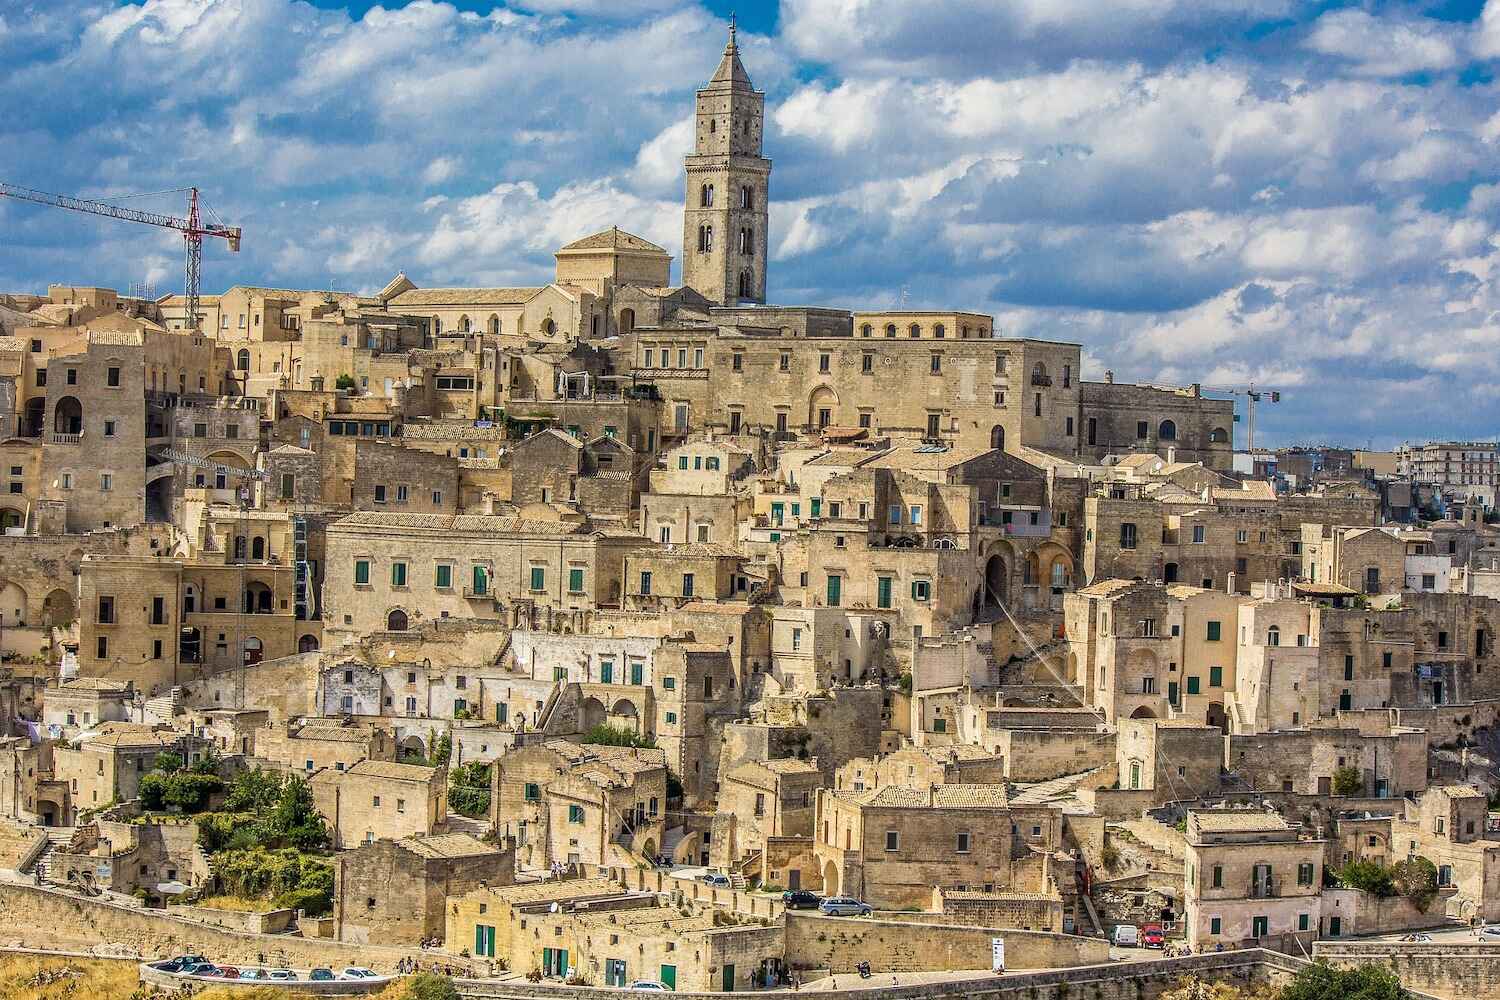 Basilicata Region: A Journey To Discover Authentic Italy